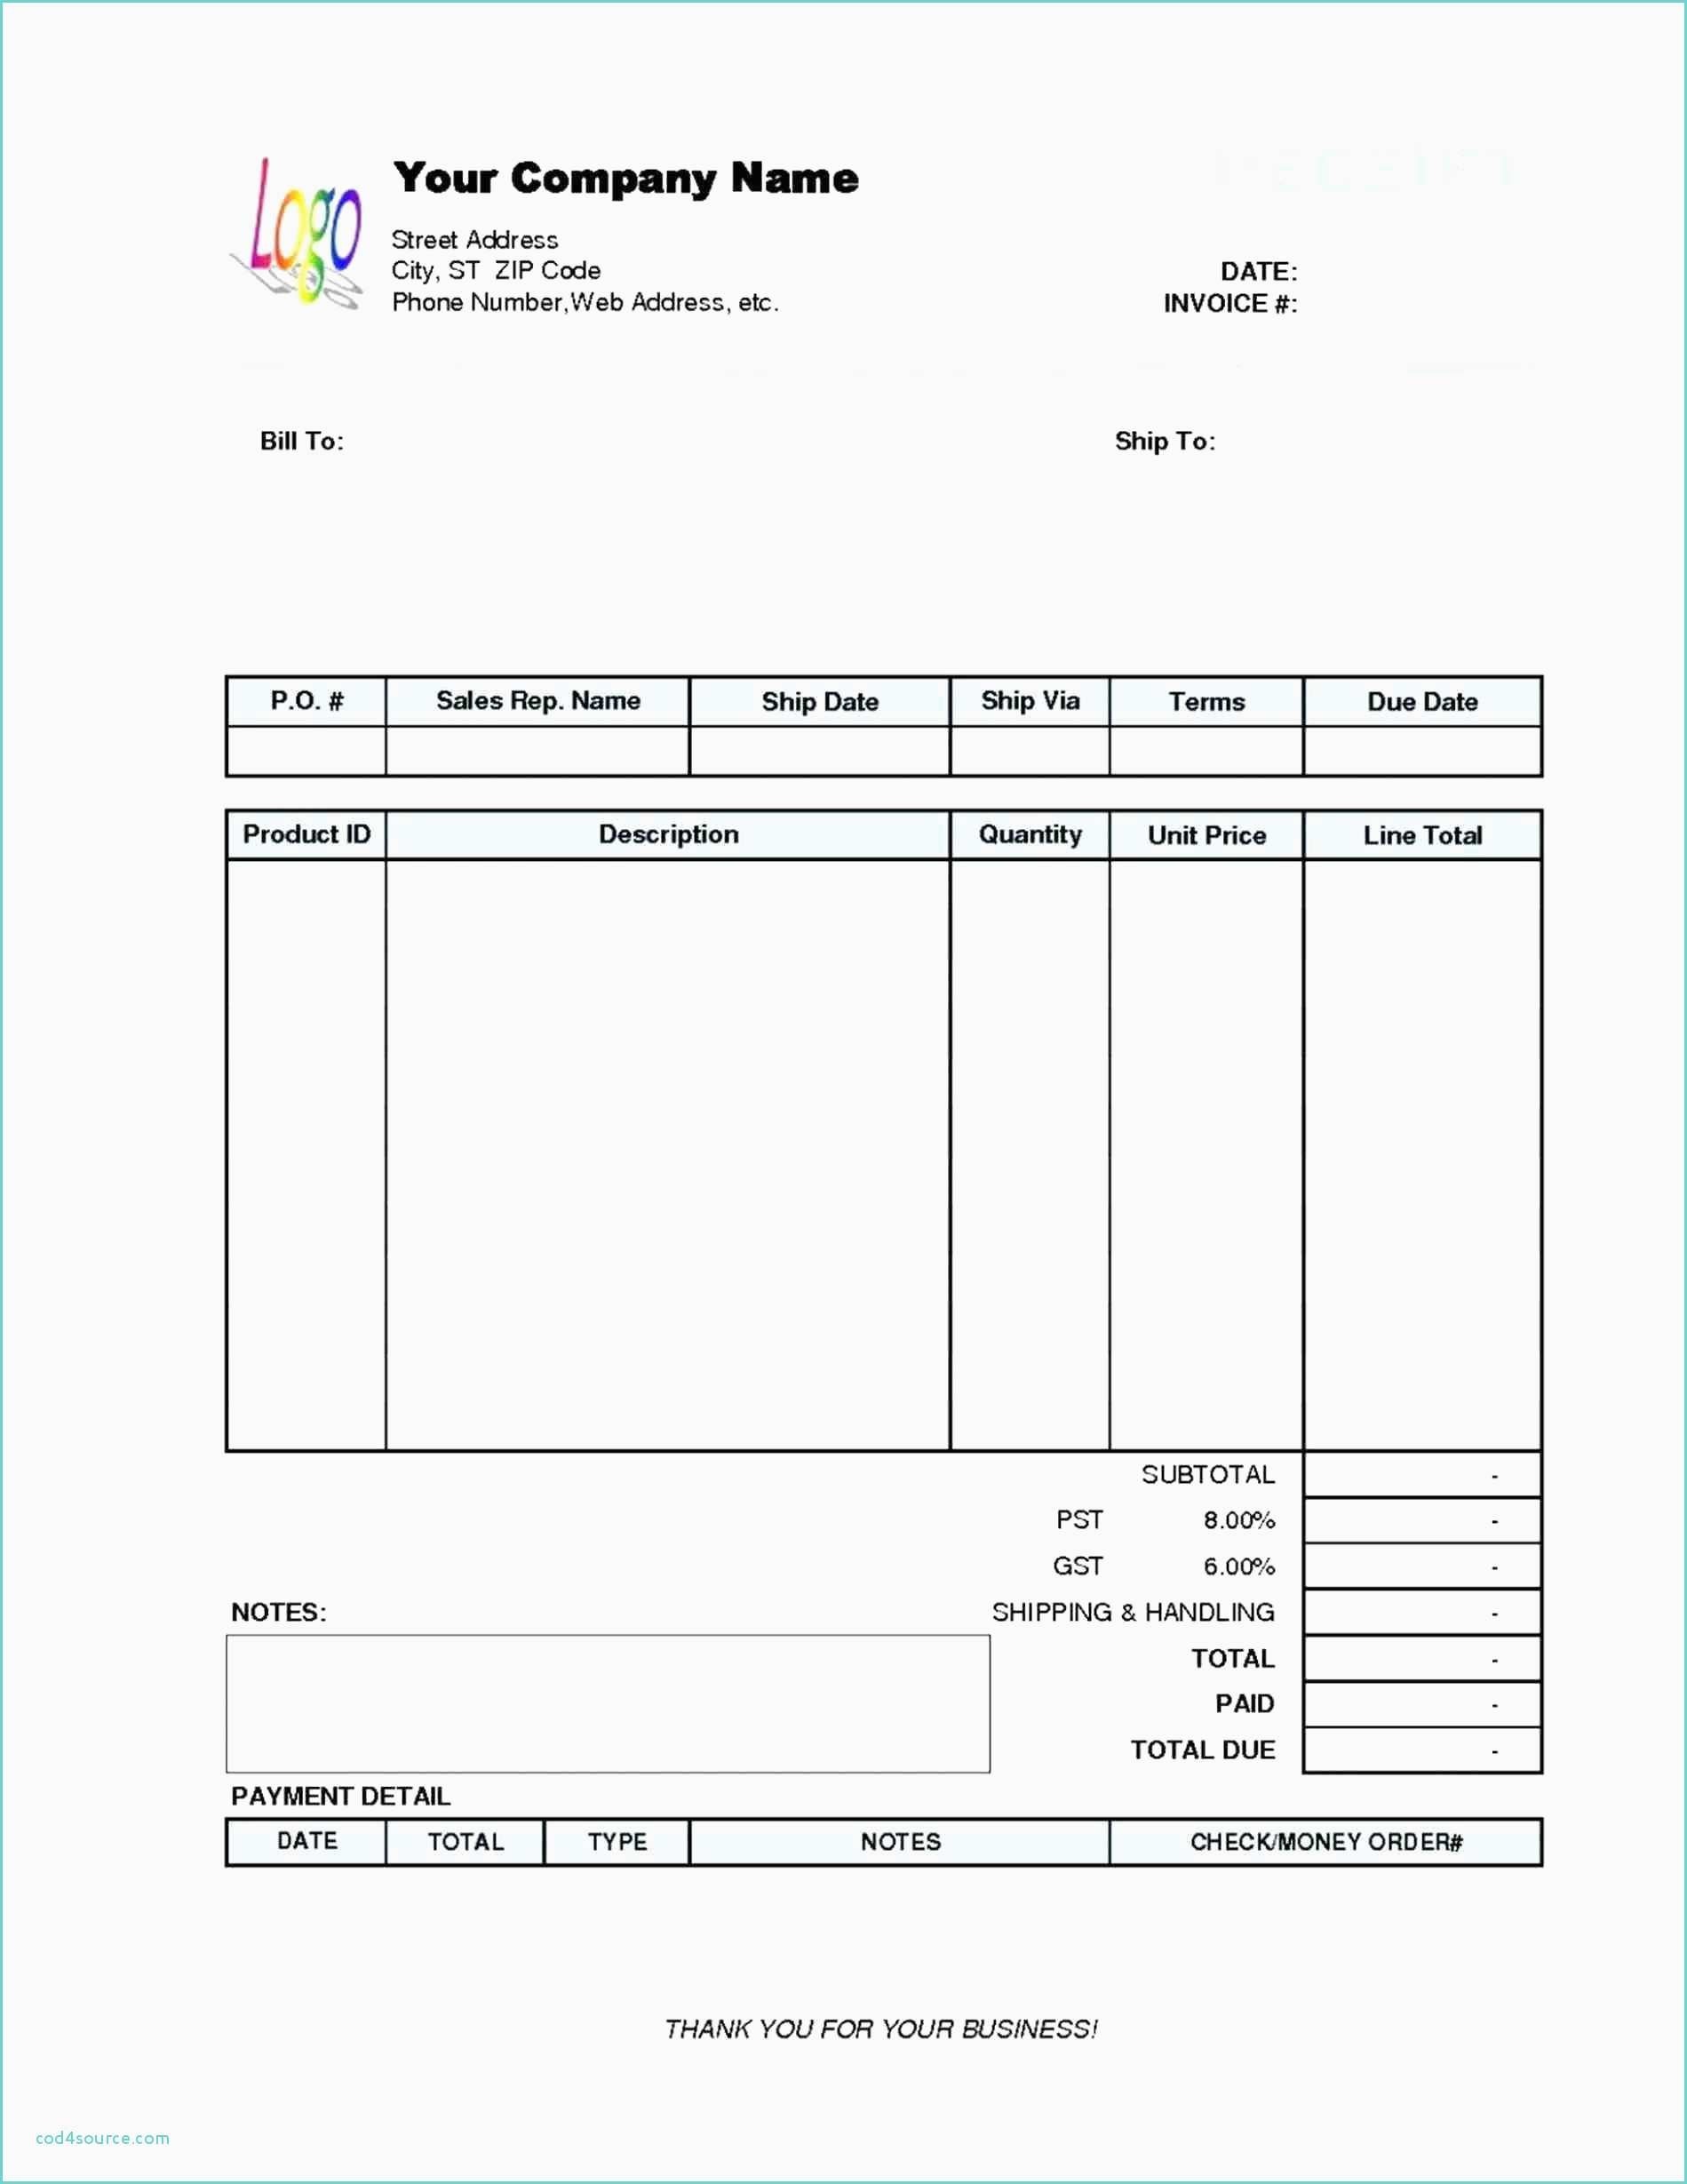 5+ Blank Payroll Check Paper Secure Paystub Chicano Art In 2019 Free Printable Checks